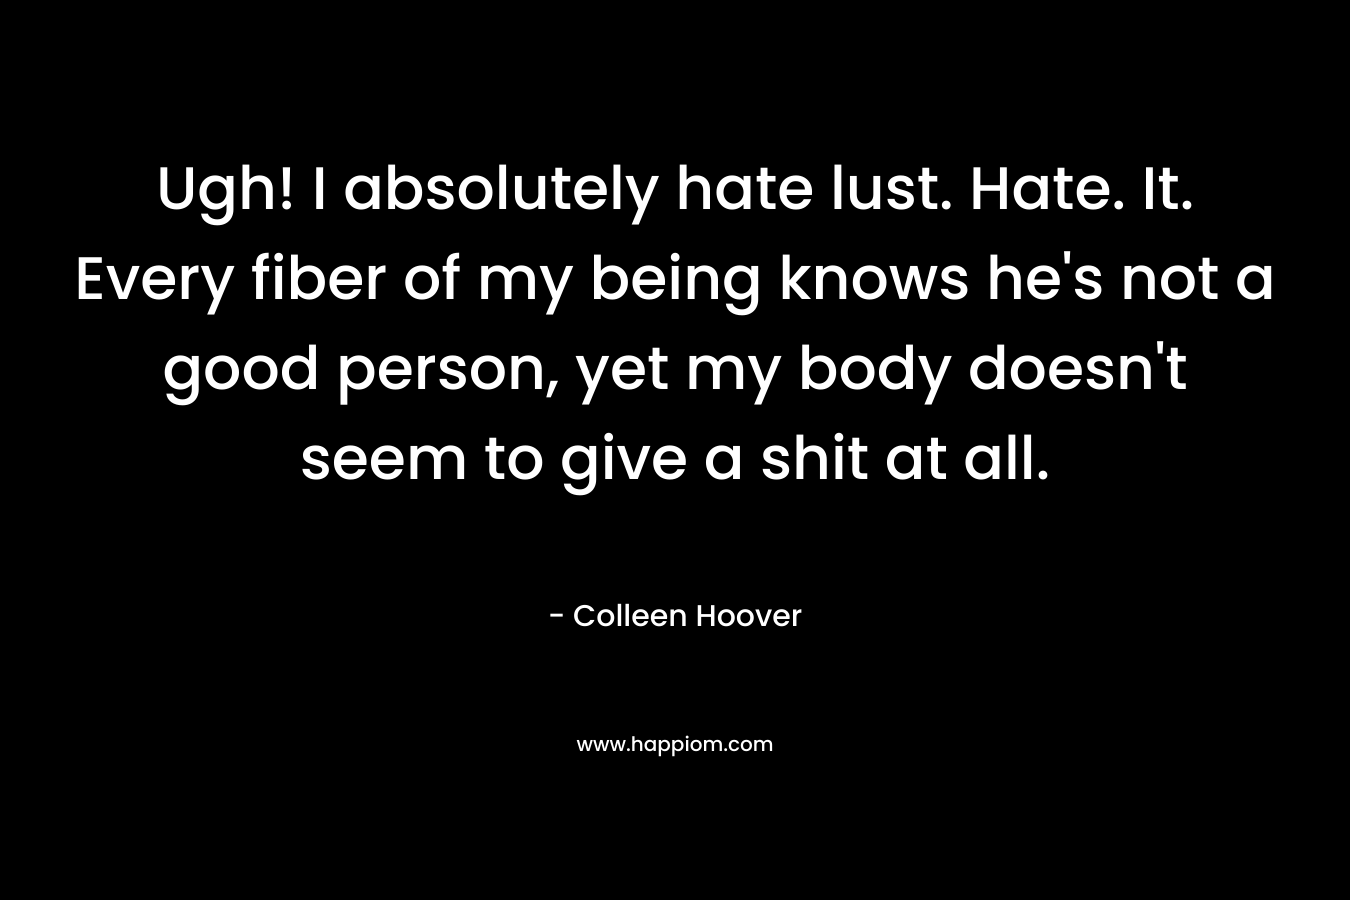 Ugh! I absolutely hate lust. Hate. It. Every fiber of my being knows he’s not a good person, yet my body doesn’t seem to give a shit at all. – Colleen Hoover